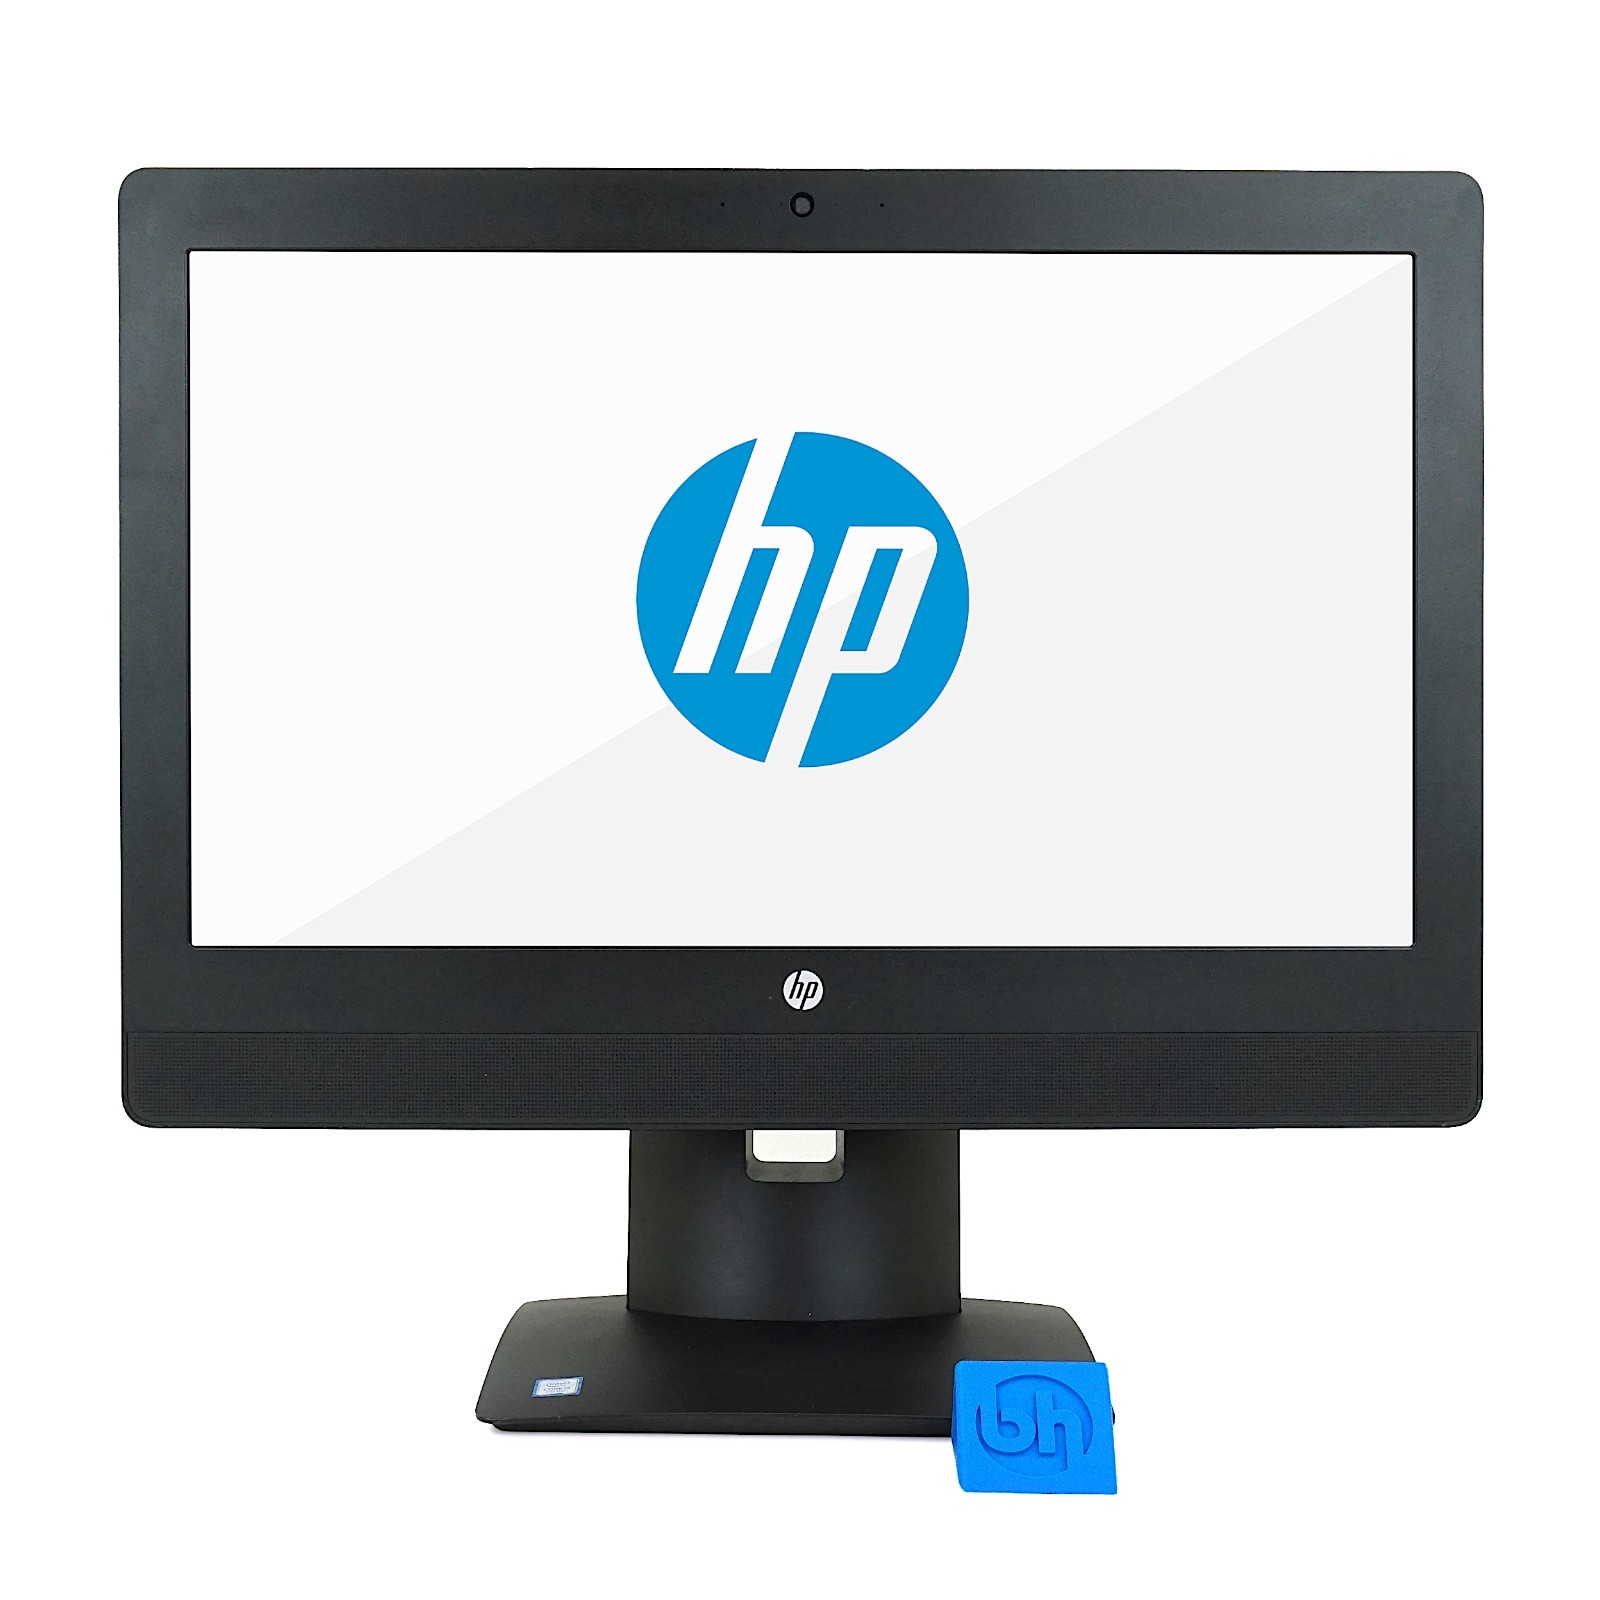 HP ProOne 600 G3 21.5" All-in-One AiO Desktop PC Front